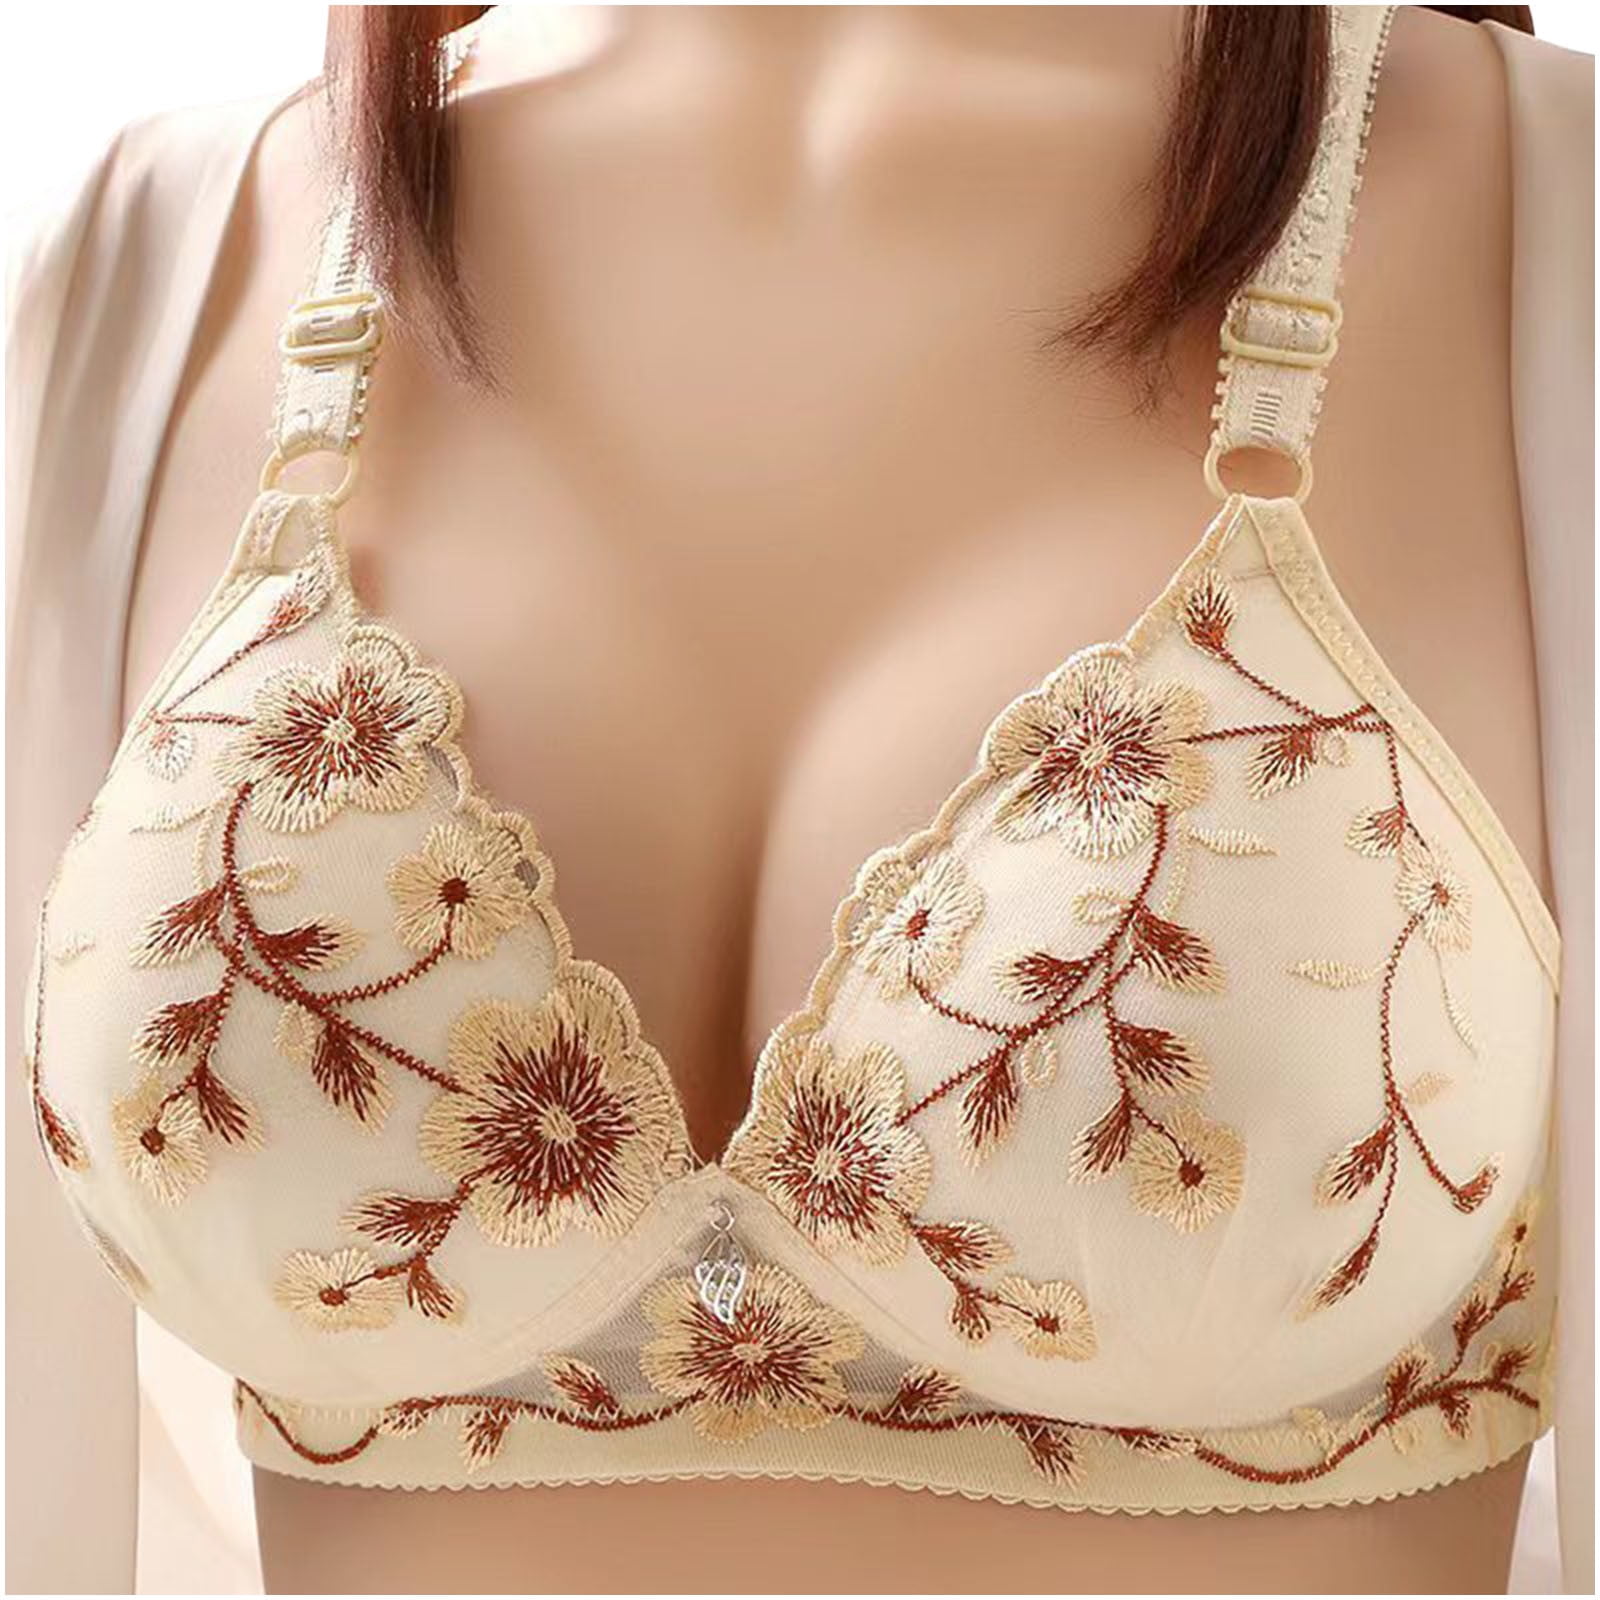 Floral Print Wireless Bra Comfy Casual Front Buckle Push Bra